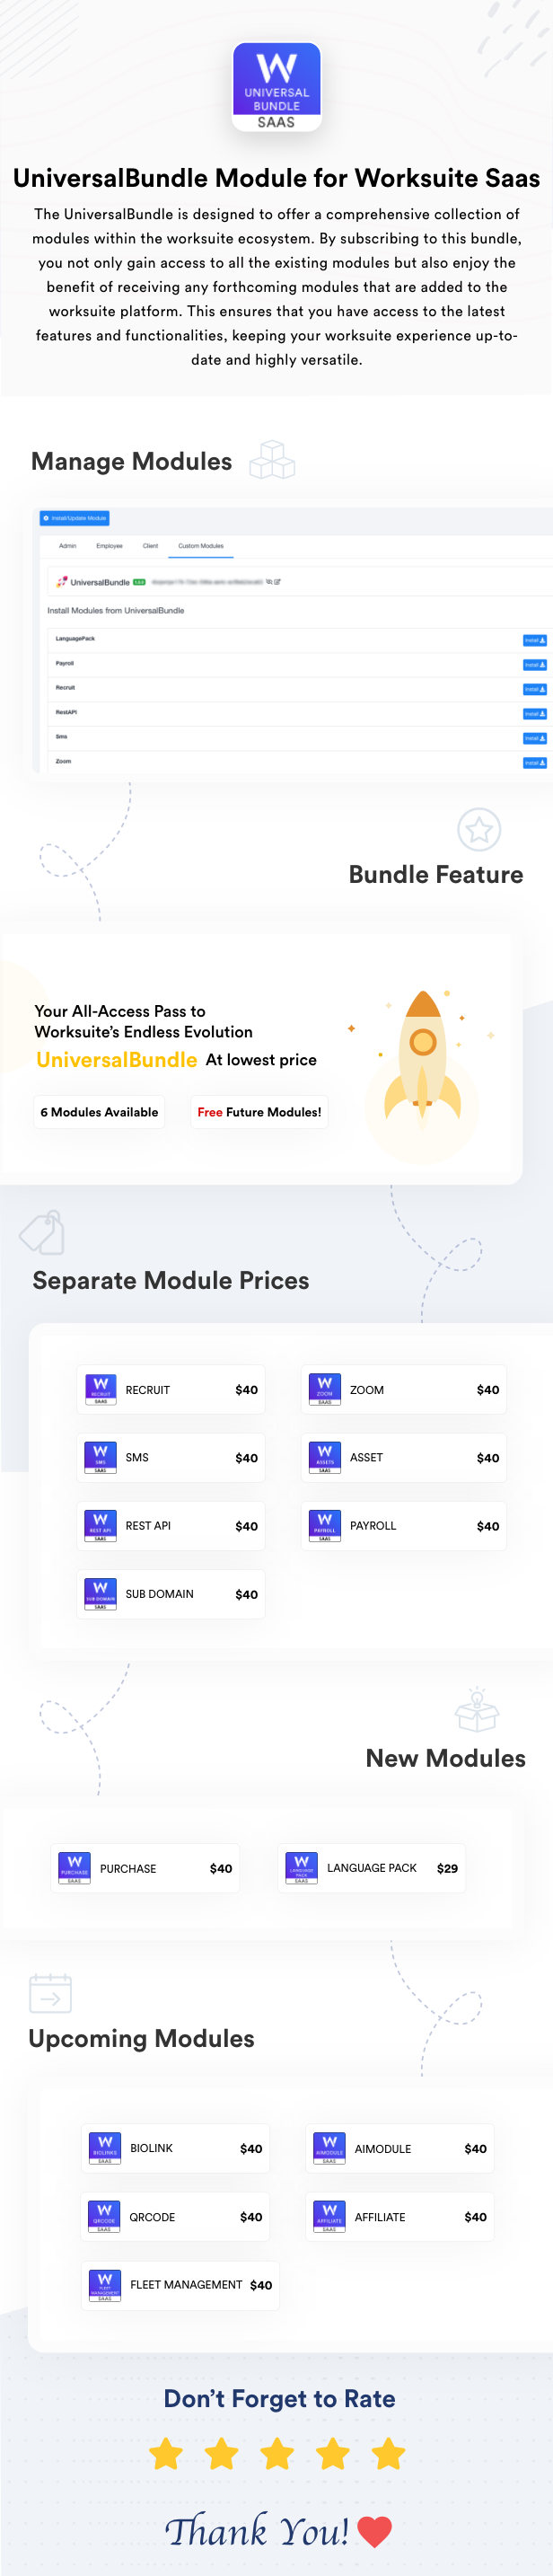 Universal Modules Bundle for Worksuite SAAS - 2